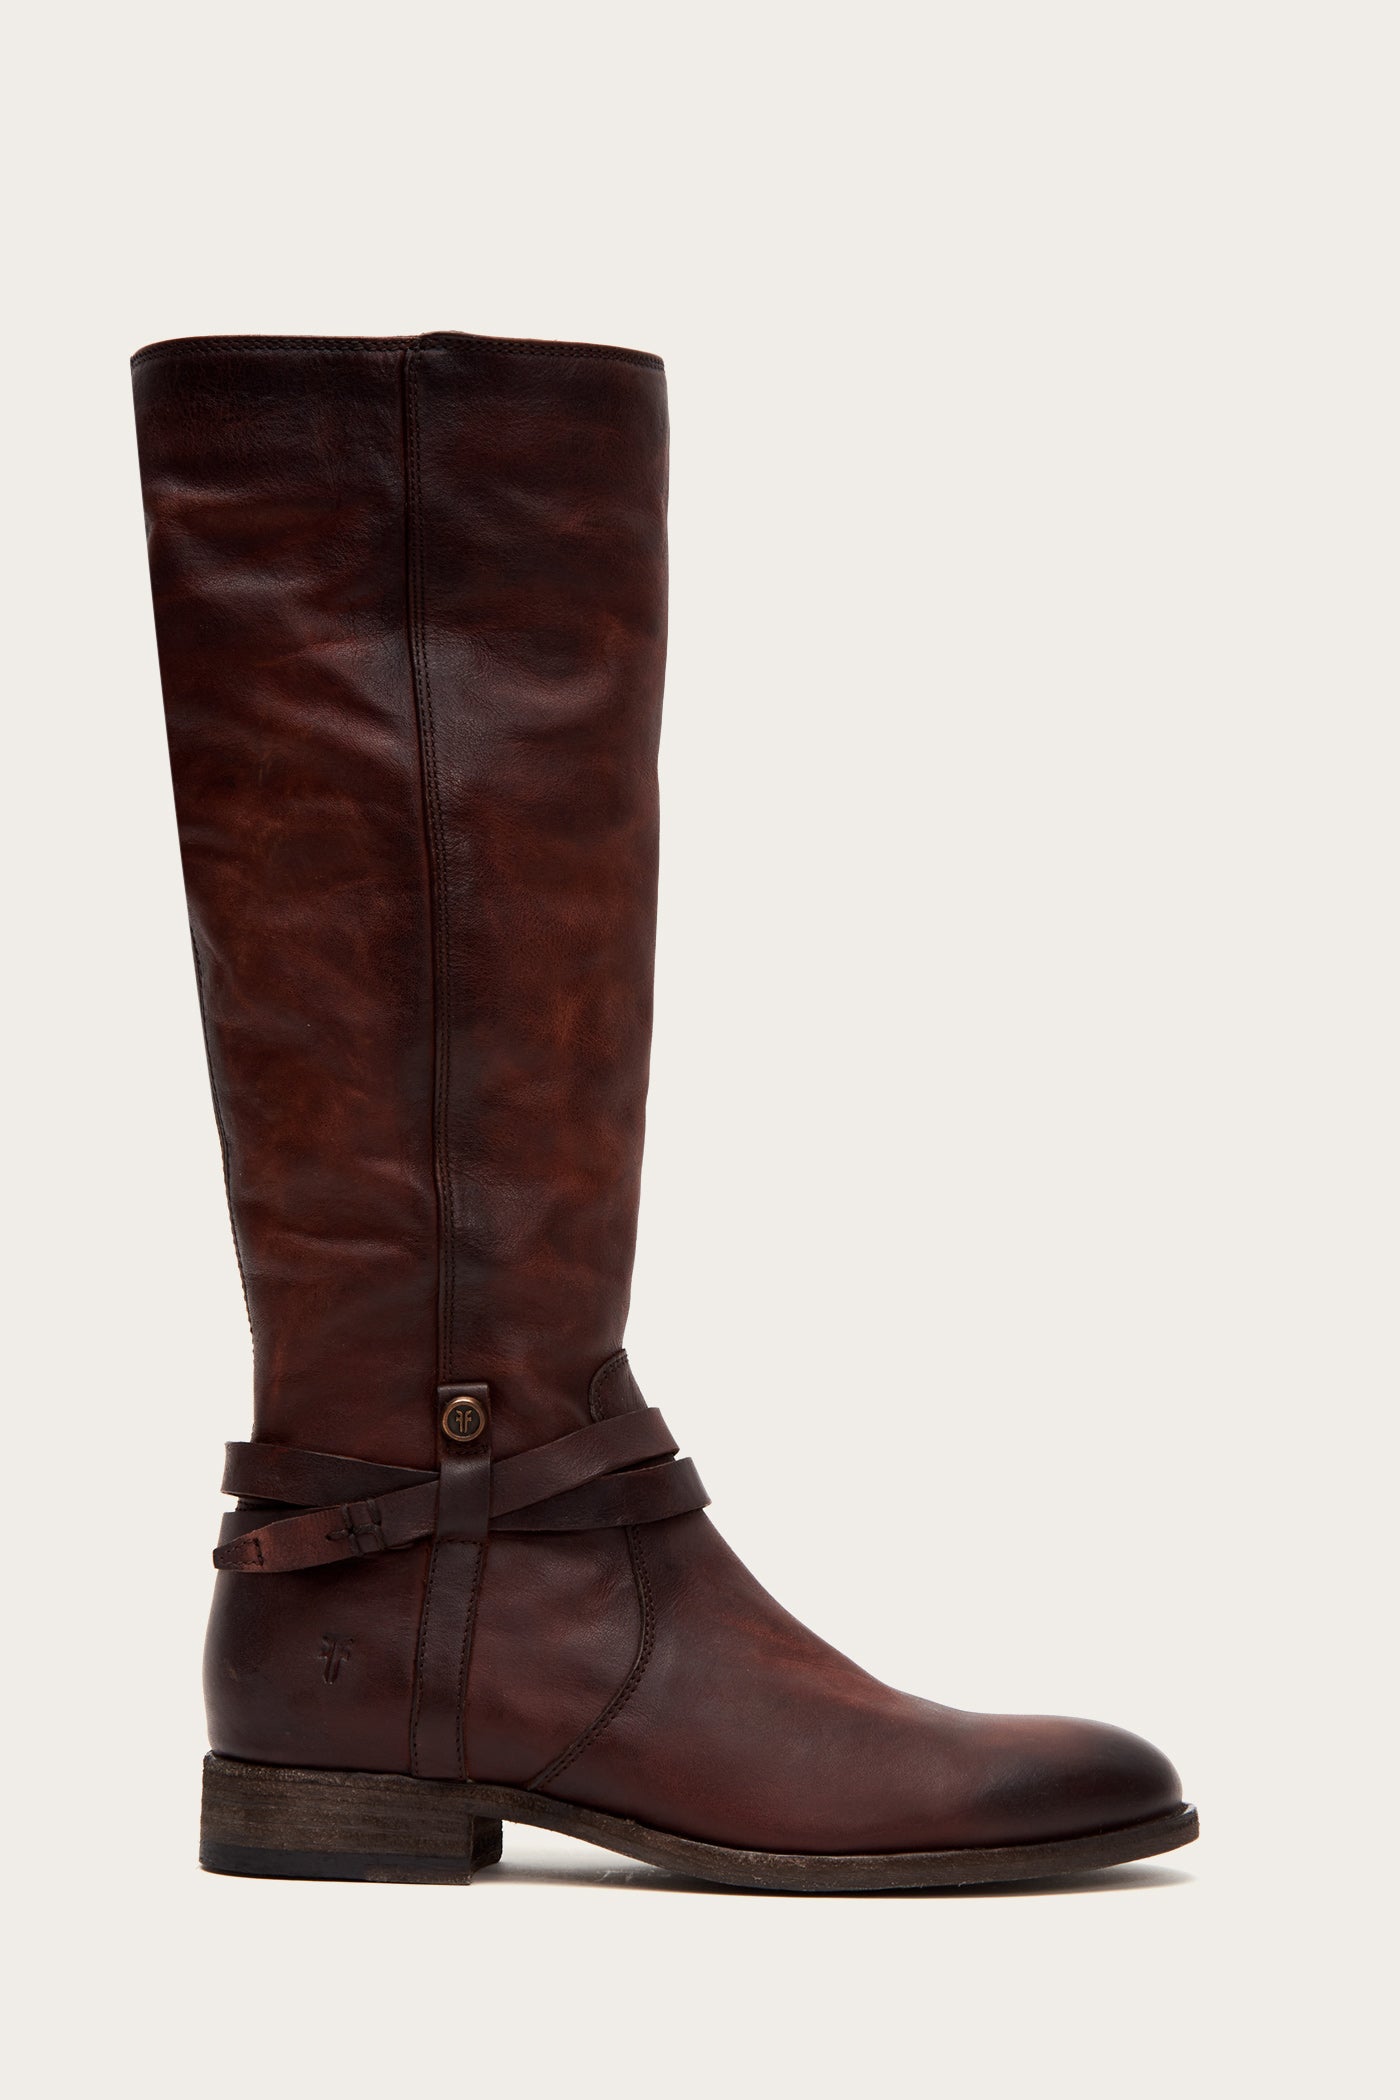 Melissa Belted Tall Wide Calf | The Frye Company